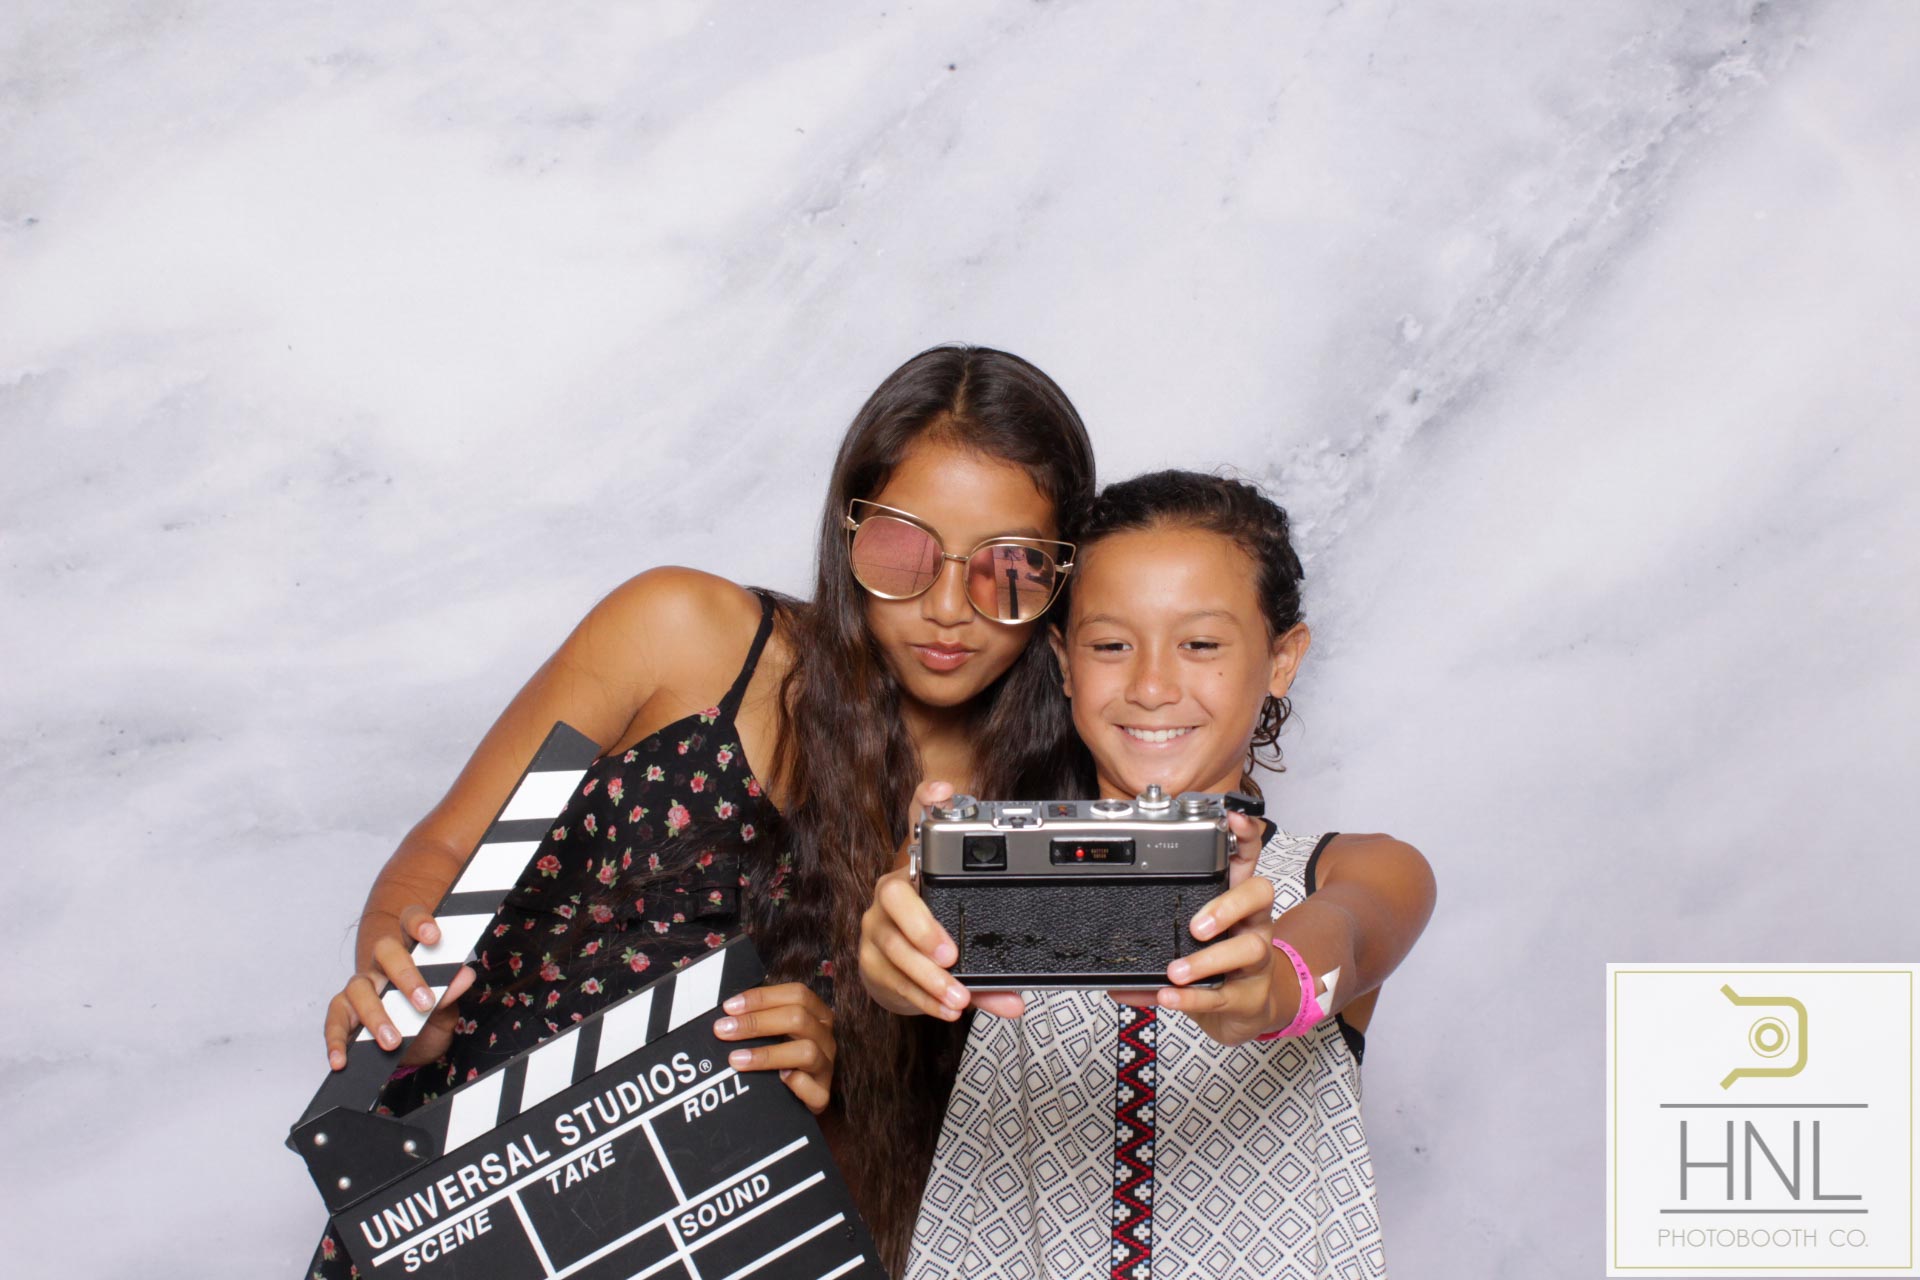 Bloom Conference Blaisdell Concert Hall Oahu Hawaii Photo Booth NEW-266.jpg